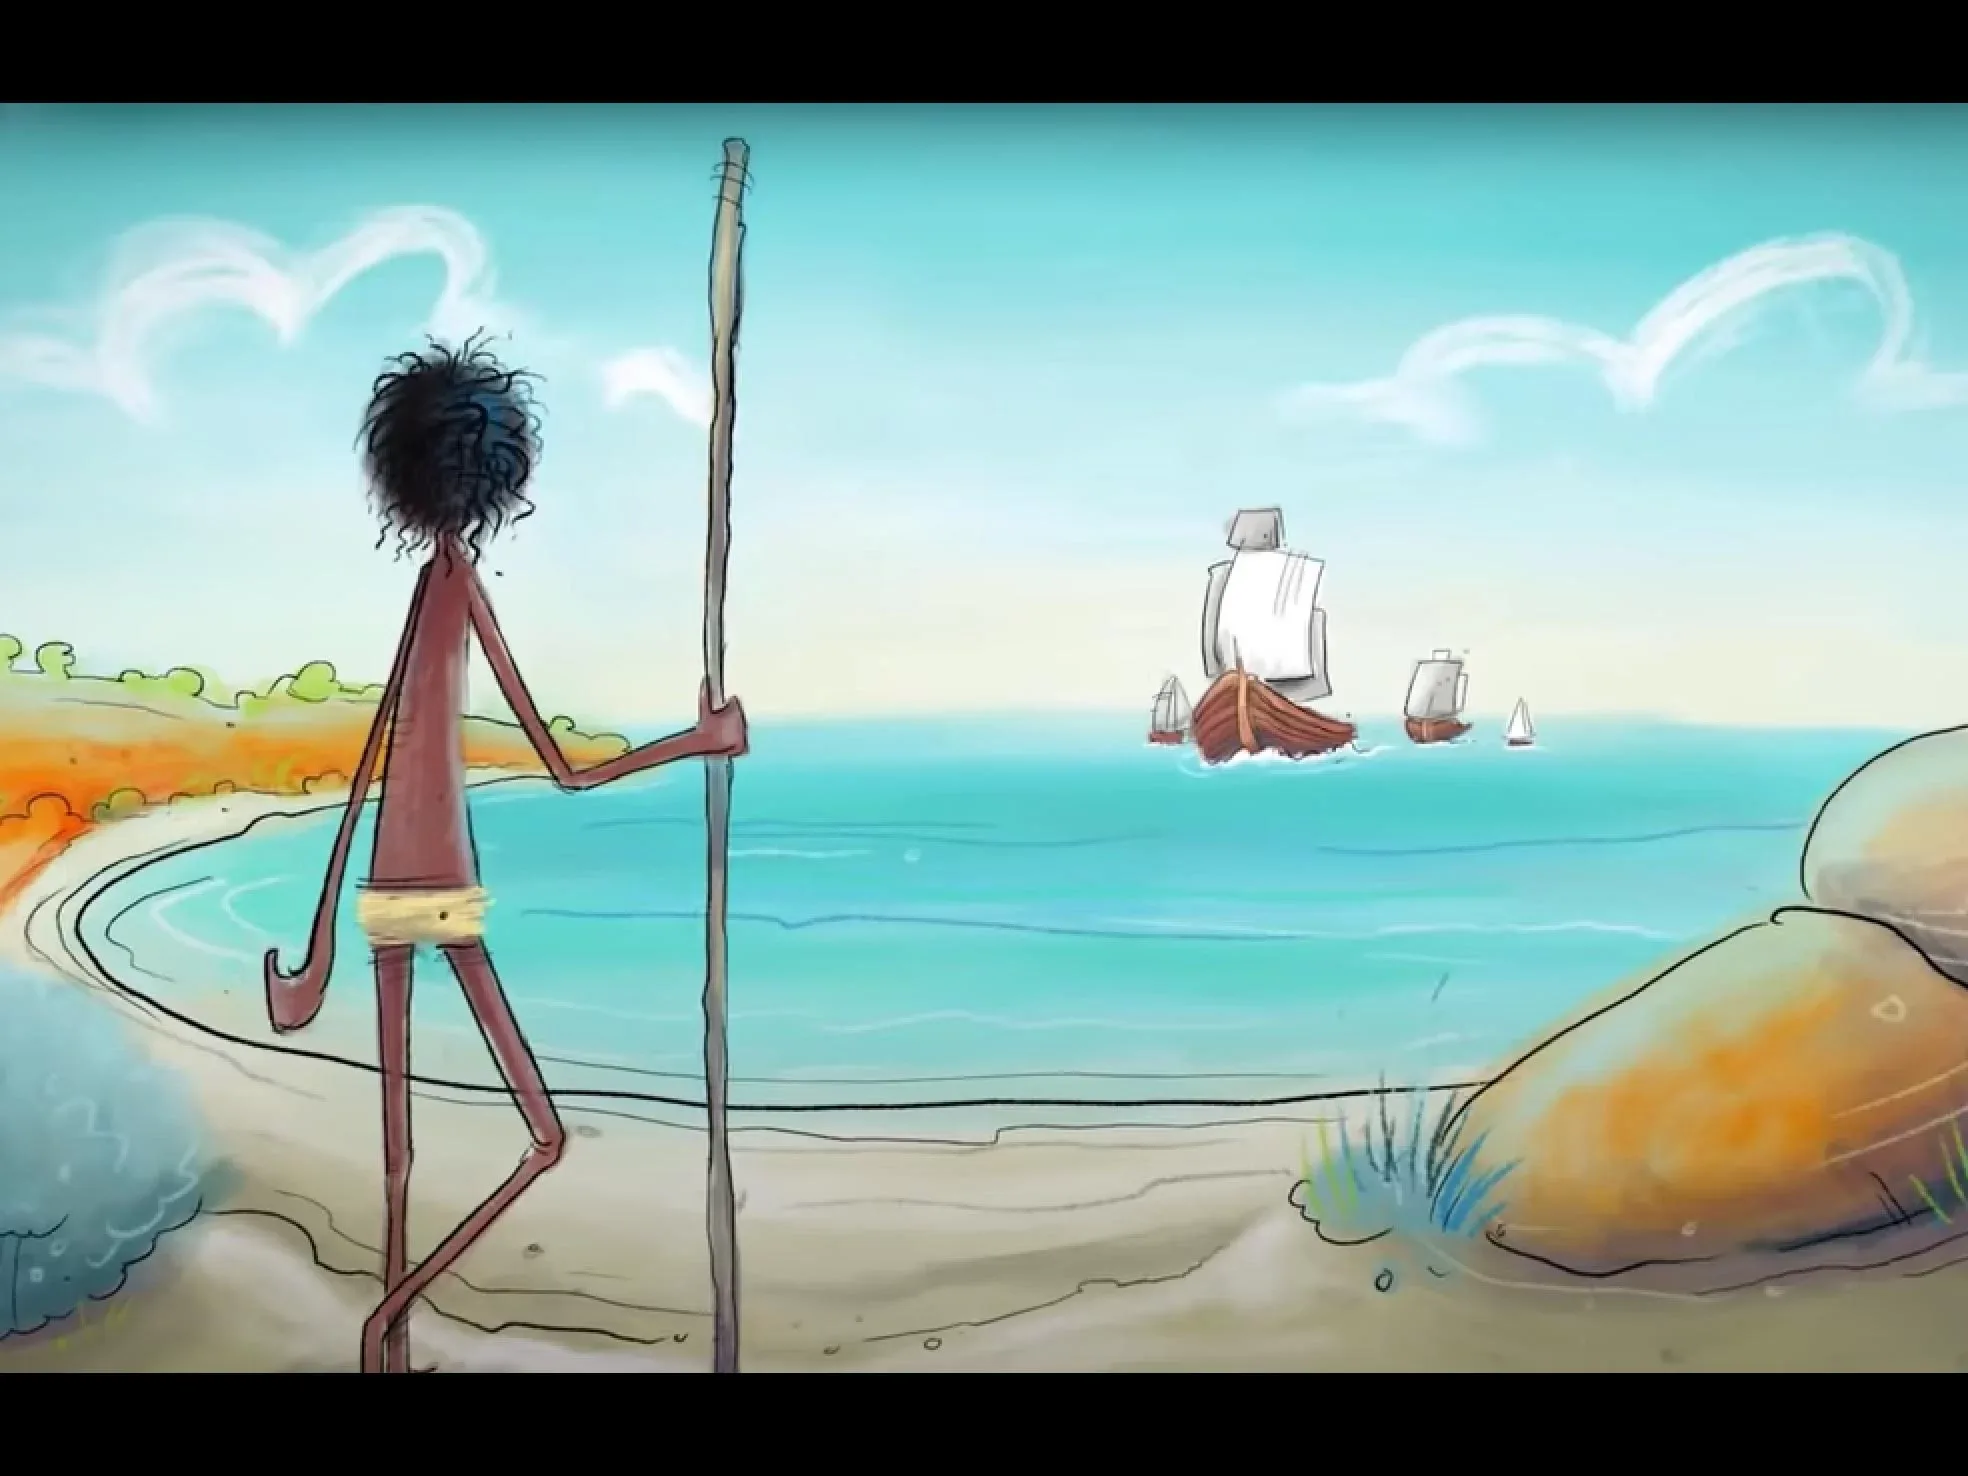 Screenshot from the Journey of health and wellbeing video